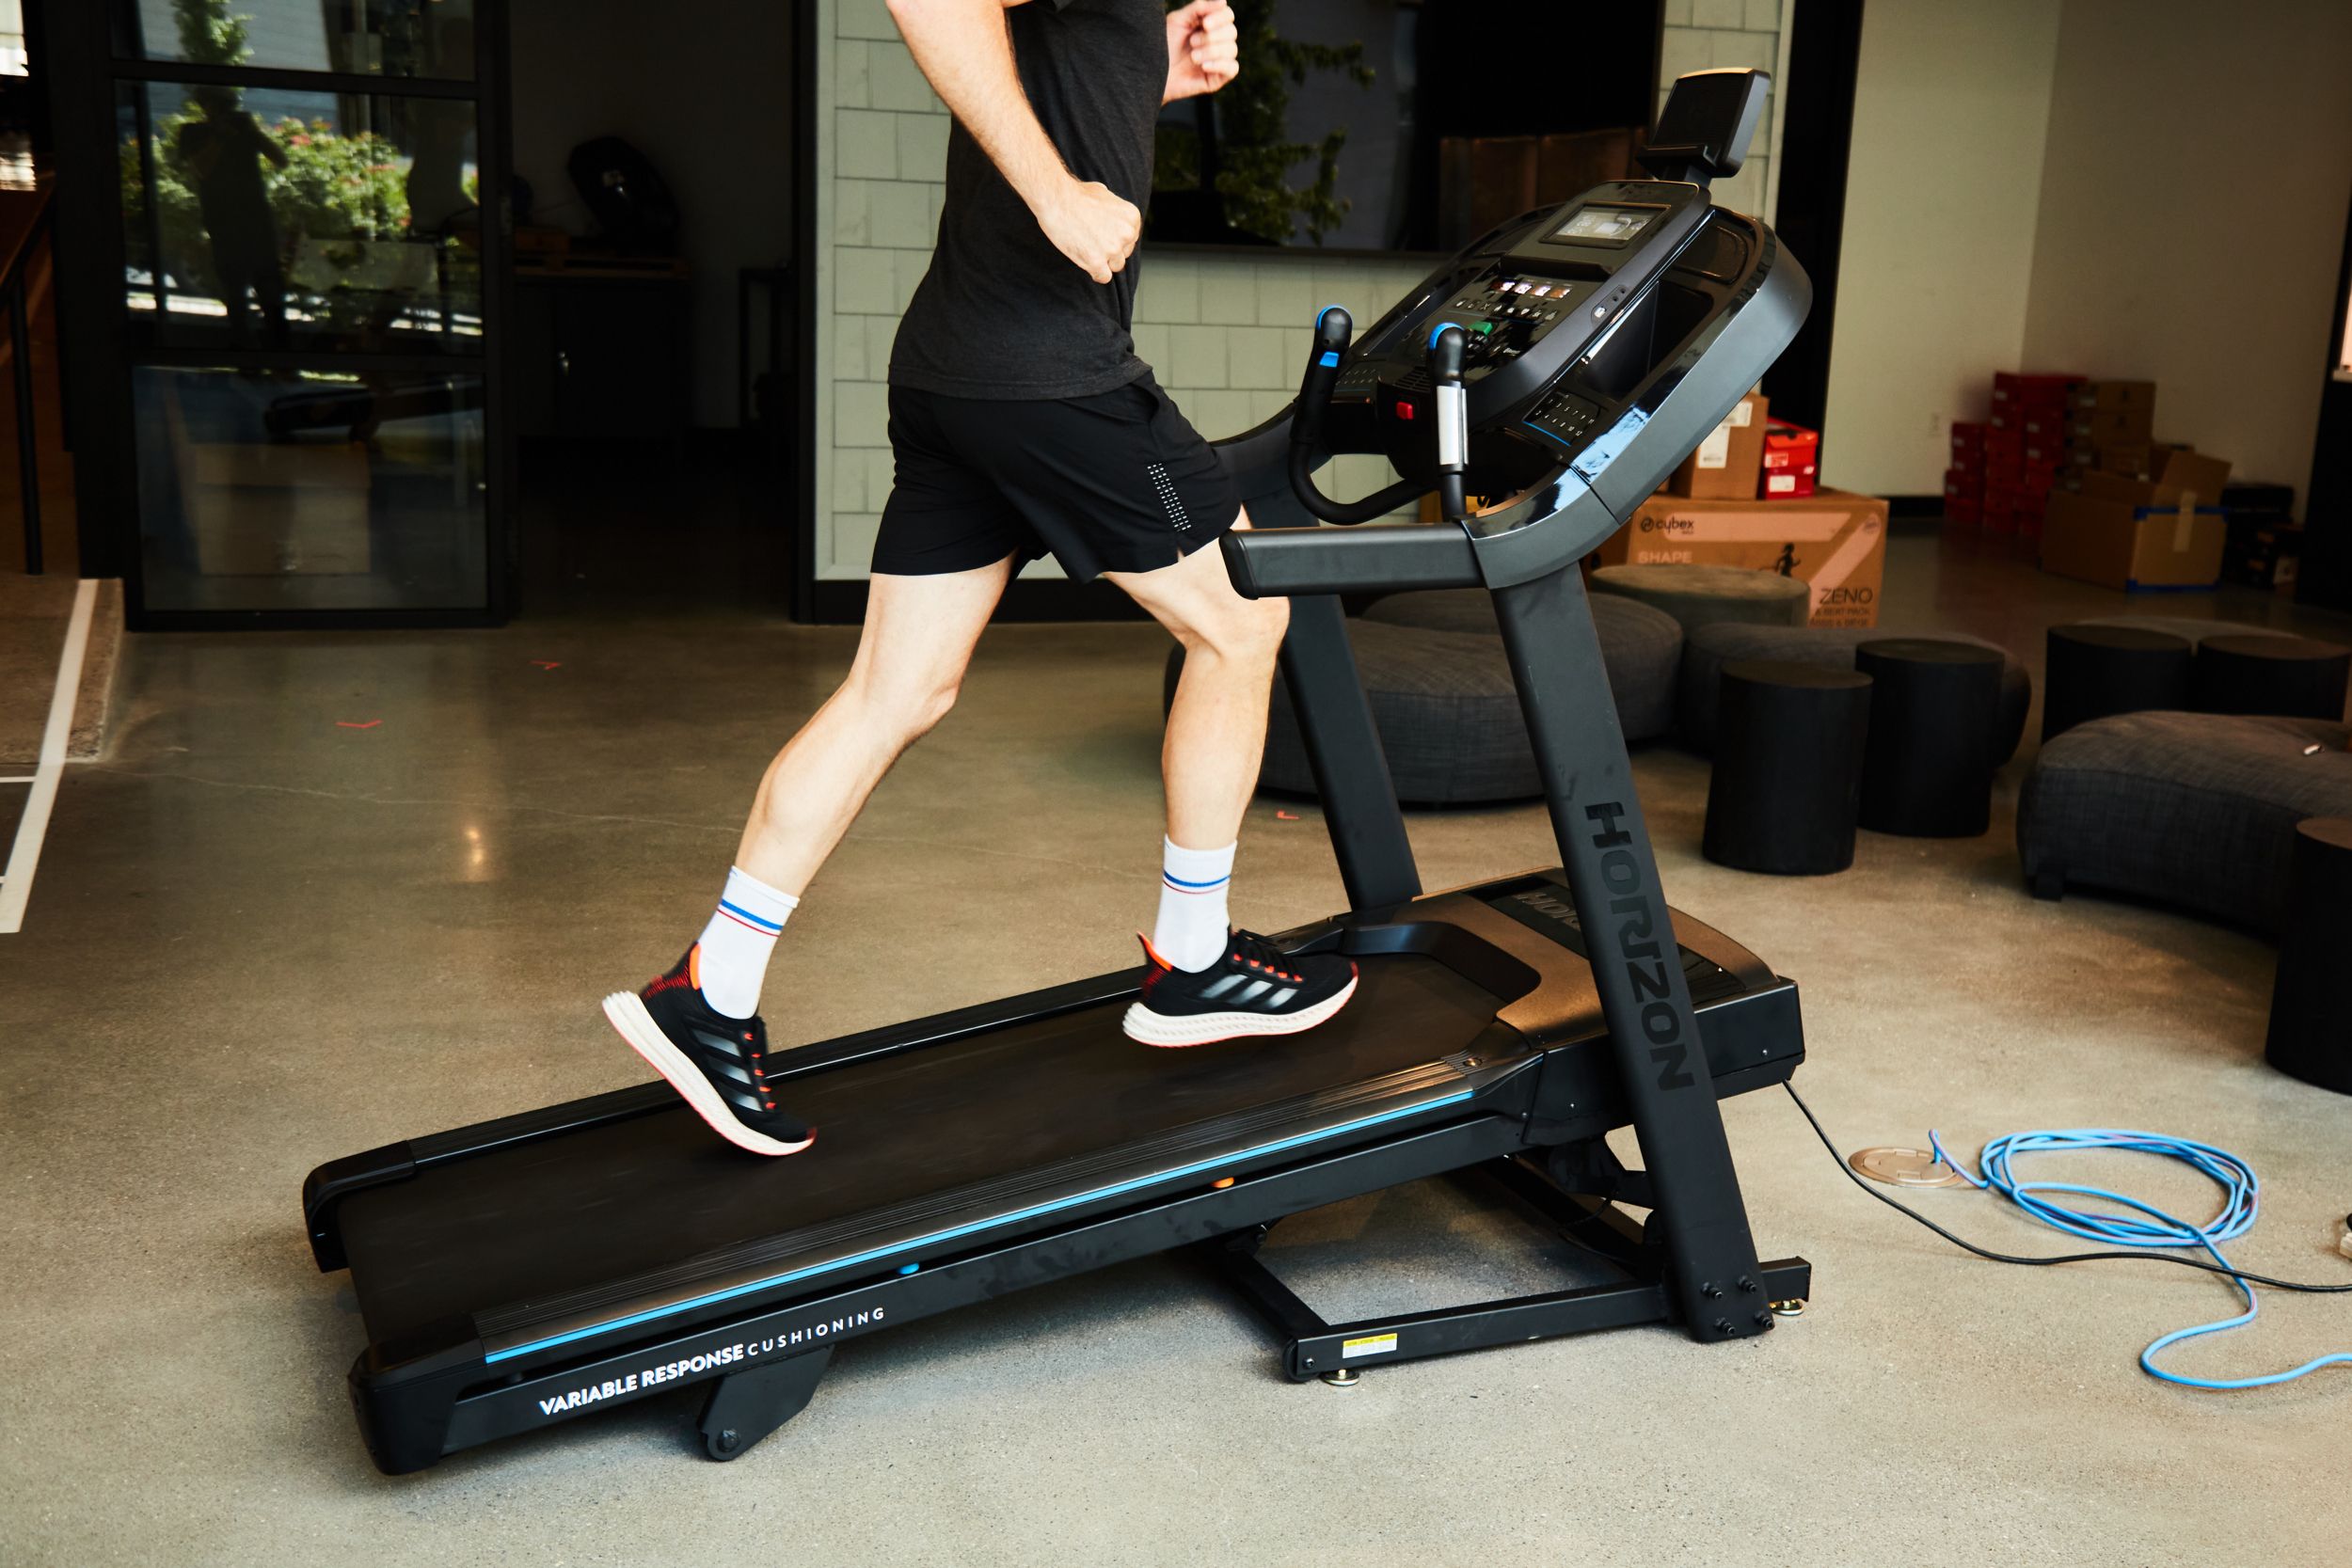 Top 10 Treadmill Brands for Home Workouts